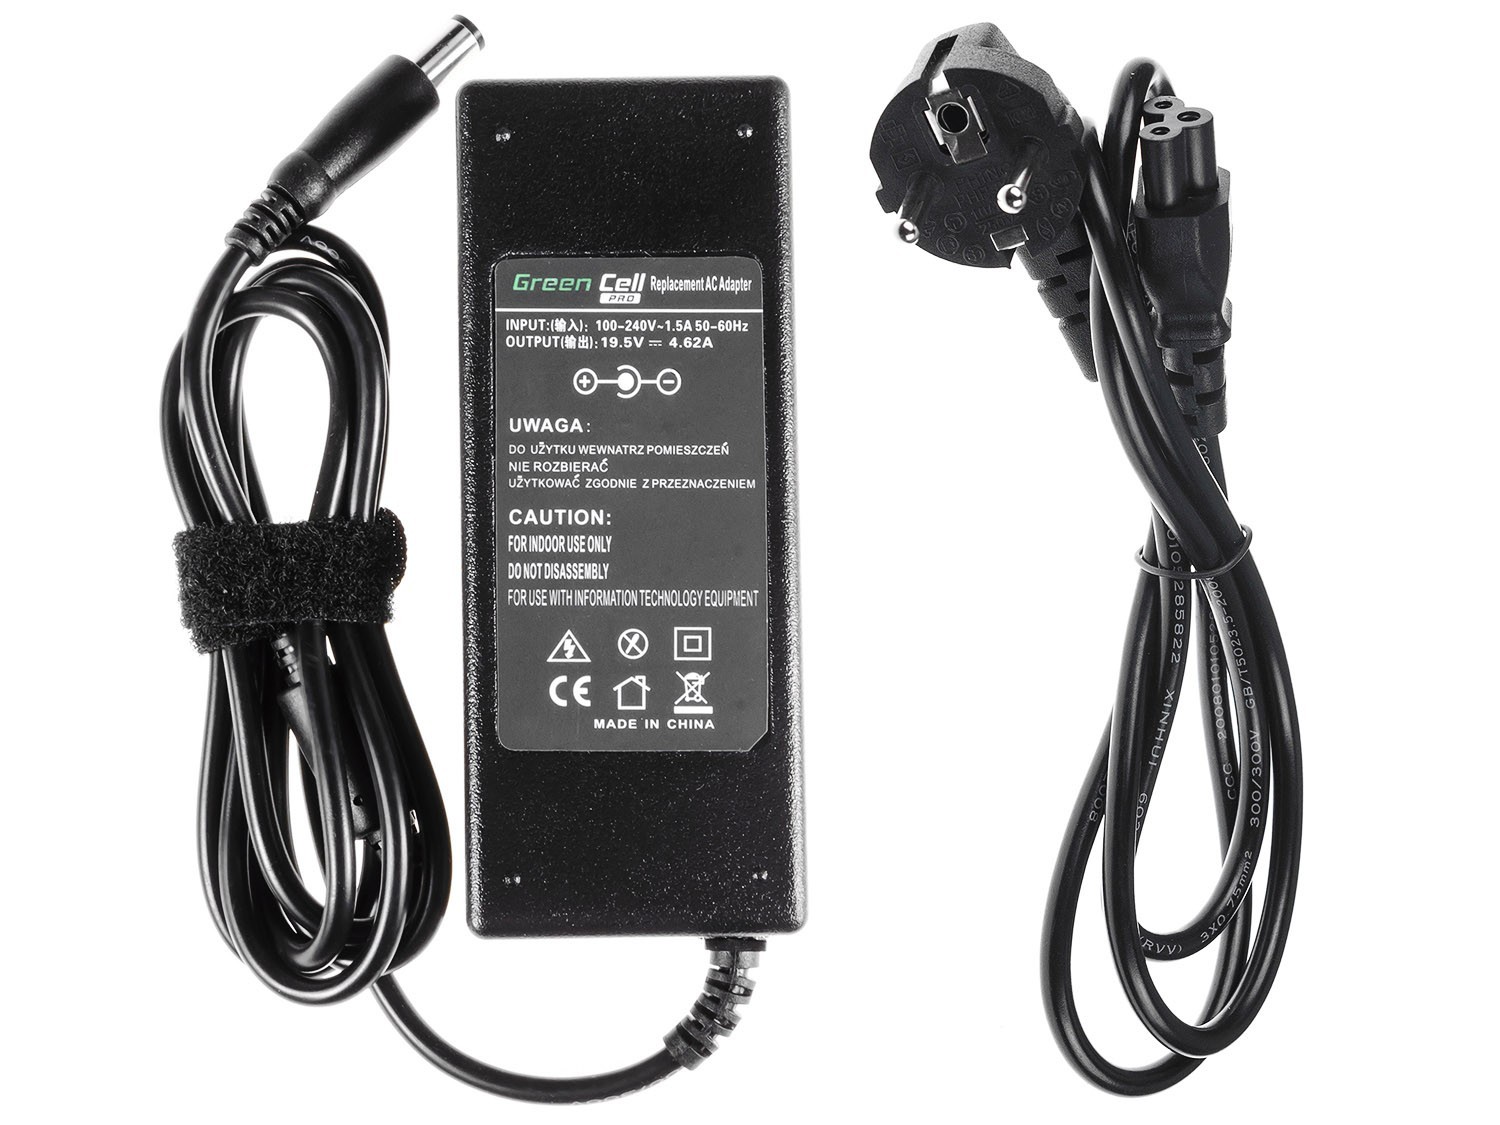 dell inspiron n5010 charger